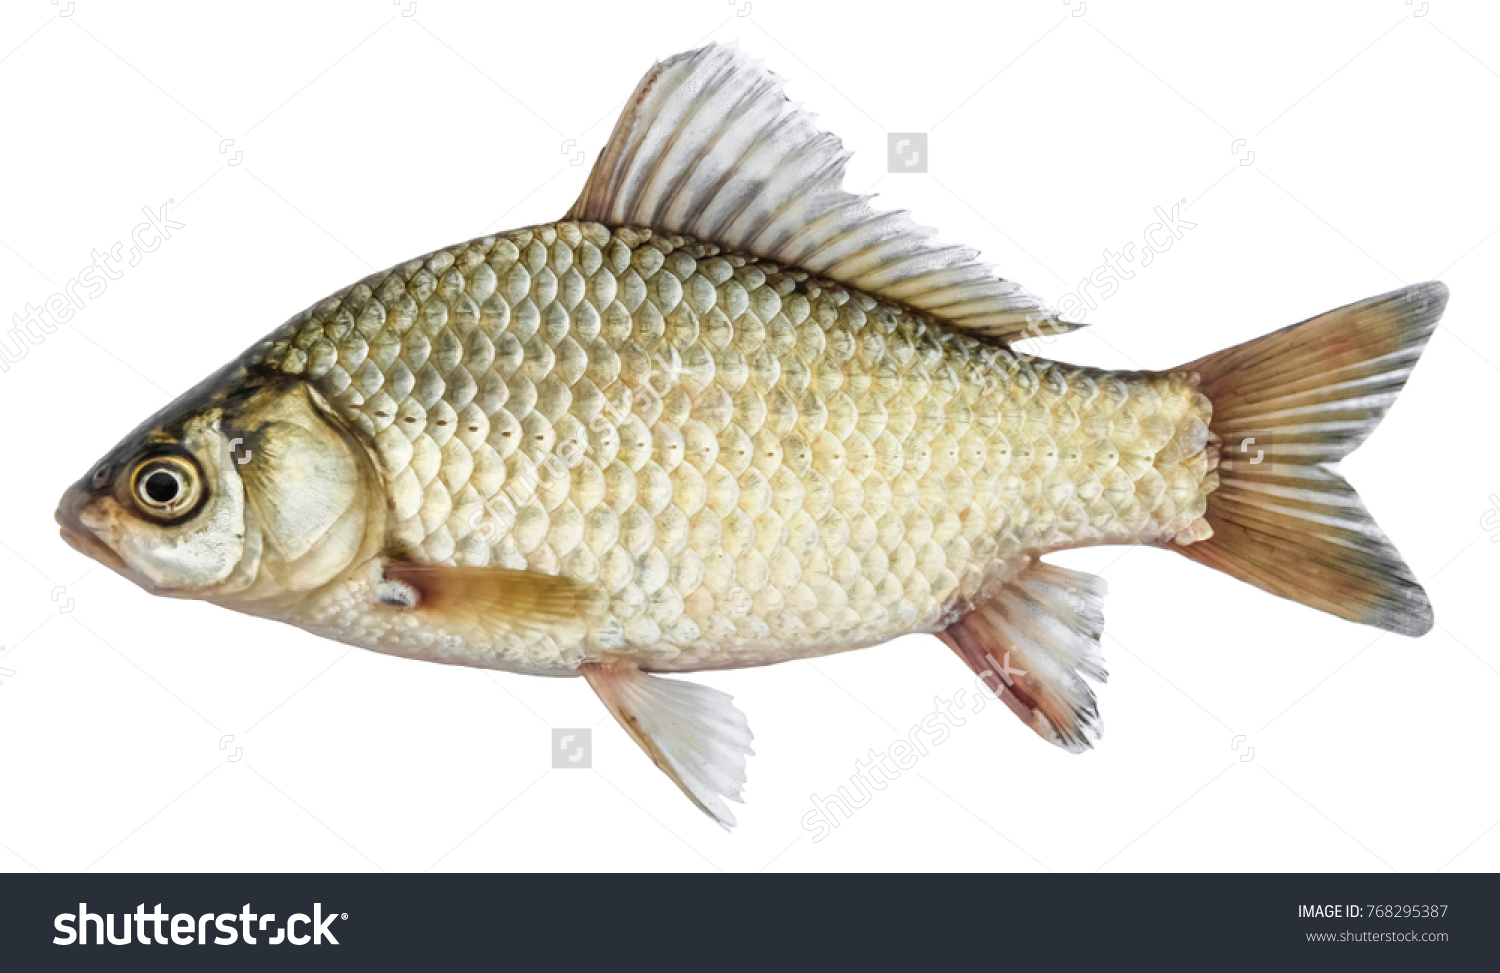 Isolated crucian carp, a kind of fish from the side. Live fish with flowing fins. River fish #768295387